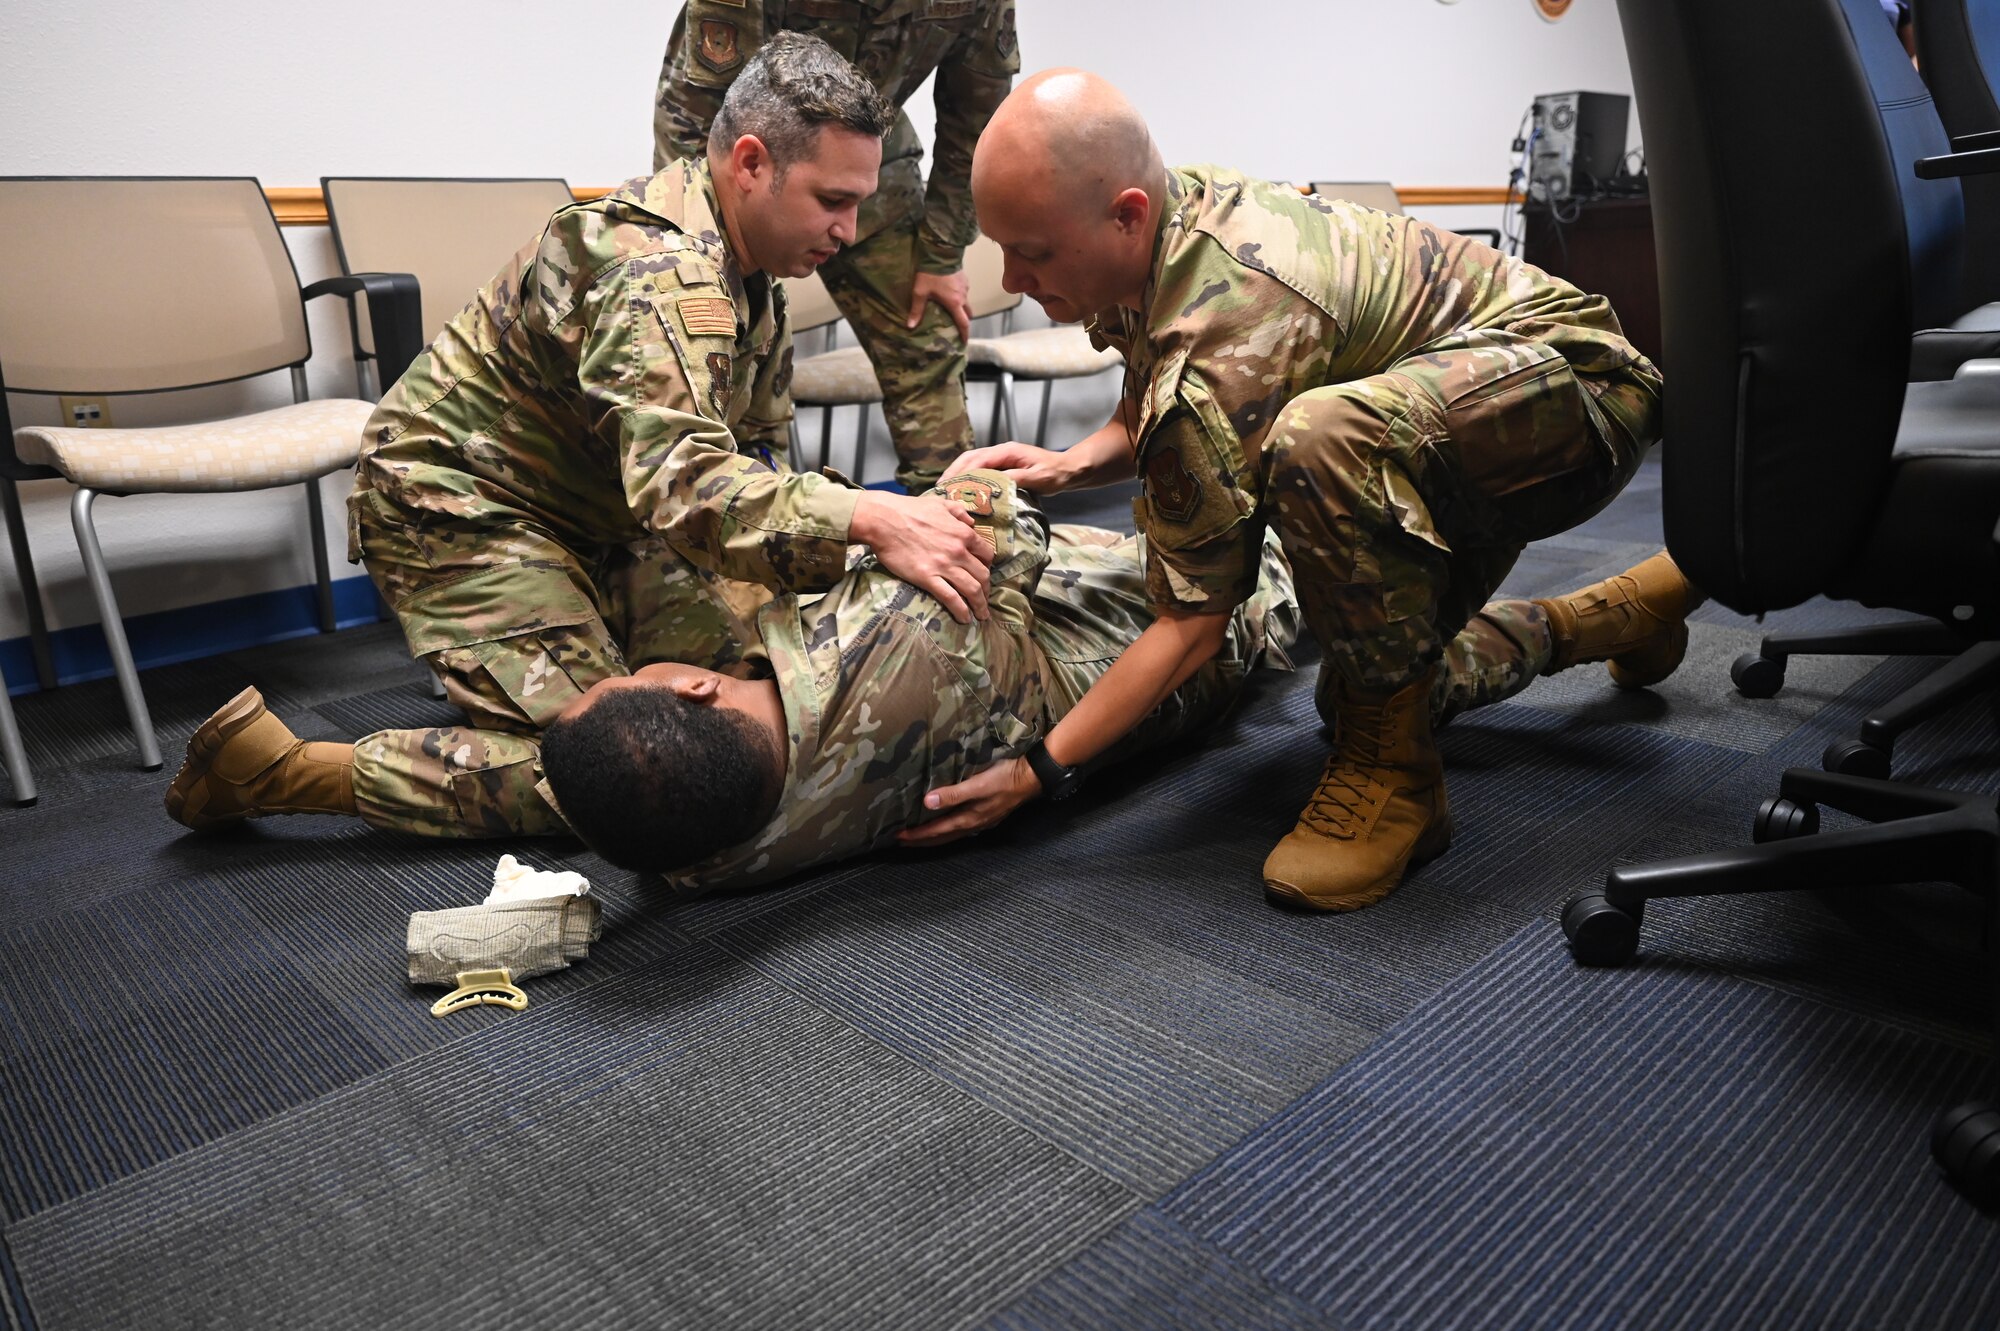 Senior Airman Cesar Zayas, 960th Cyberspace Operations Group client support technician, and Tech. Sgt. Jesse Richter, 960th Operations Support Flight current operations NCOIC, prepare to roll Staff Sgt. Kendall Armand, 960th COG client support technician, to the recovery position during a tactical combat casualty care training class June 4, 2022, at Joint Base San Antonio-Chapman Training Annex, Texas.